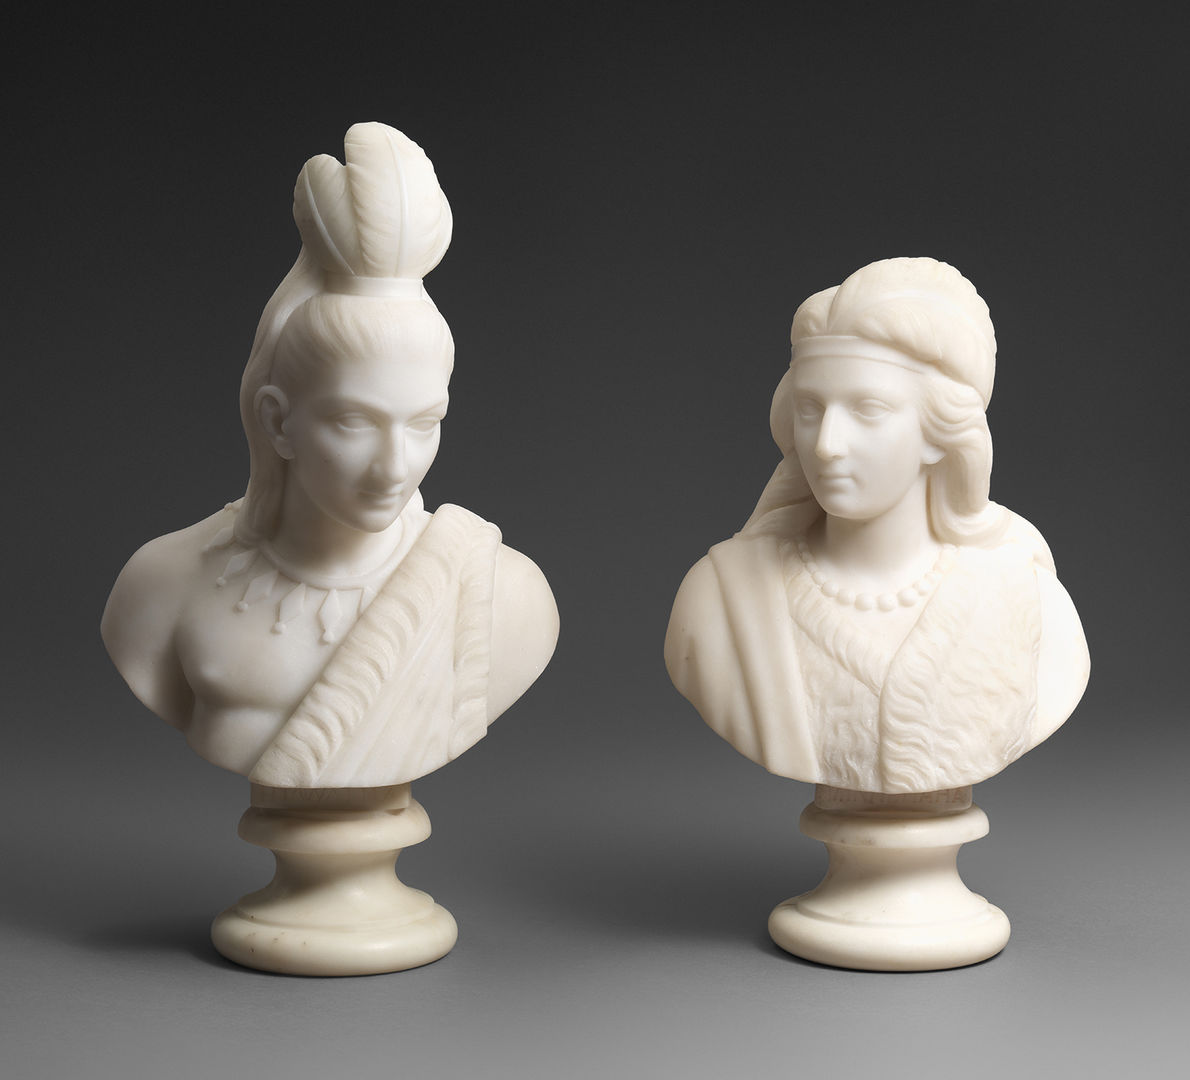 Two marble busts of Native American figures, Minnehaha and Hiawatha.